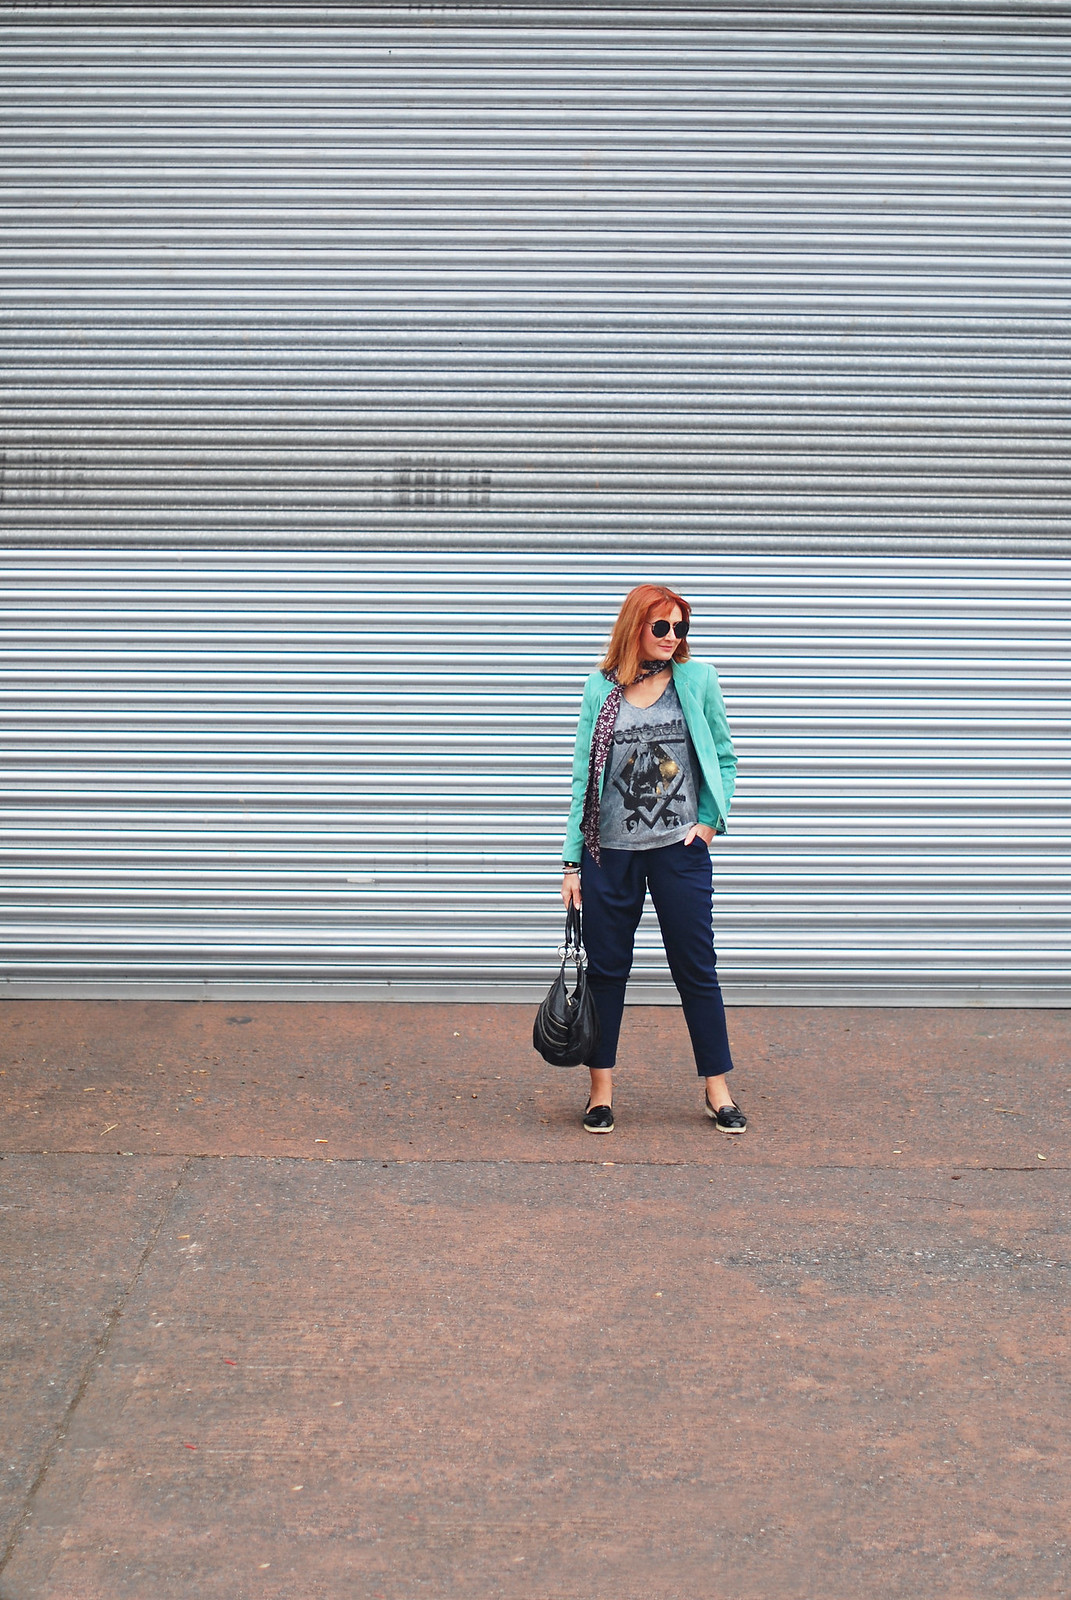 Rock Chic Meets Corporate Style: Navy and black with a rock tee, skinny scarf and mint biker jacket | Not Dressed As Lamb